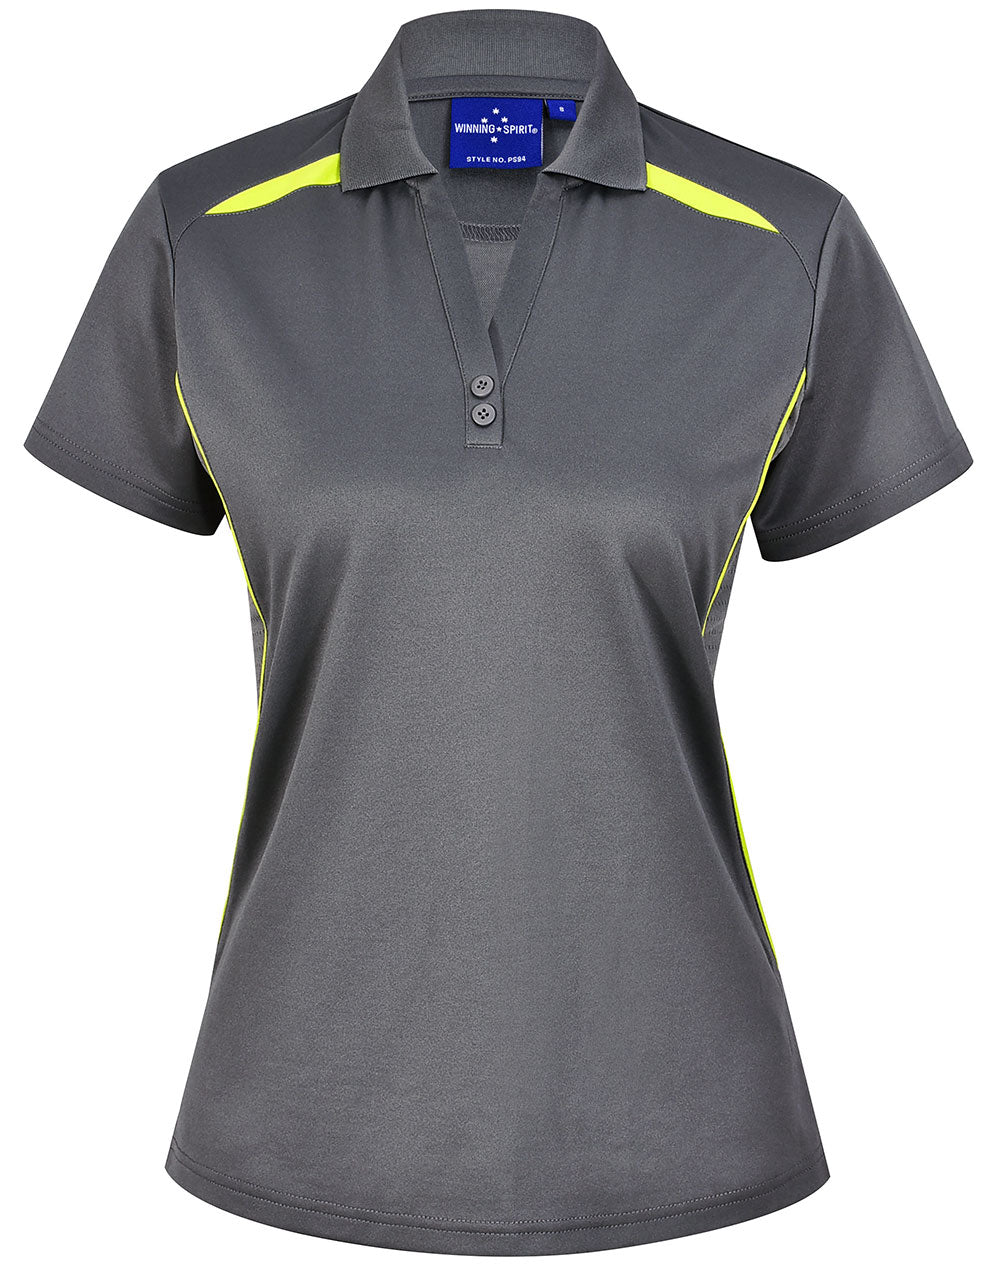 Winning Spirit Women's Sustainable Poly-Cotton Contrast Polo PS94